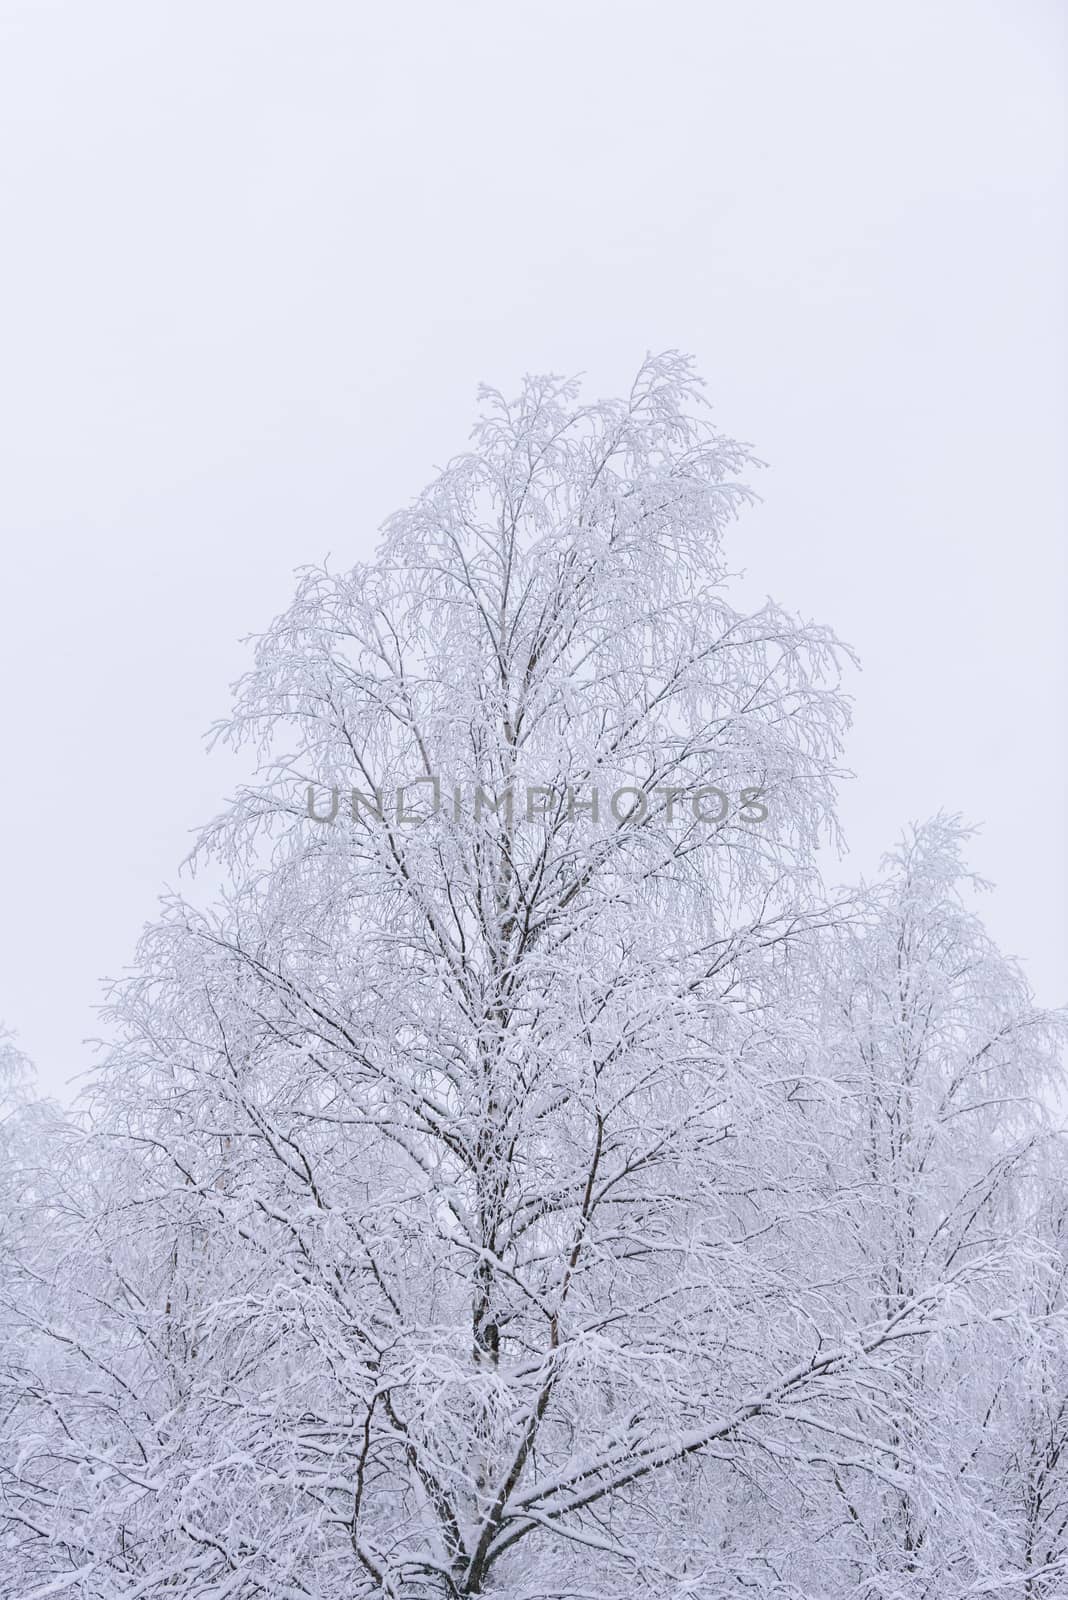 The forest has covered with heavy snow and clear blue sky in win by animagesdesign